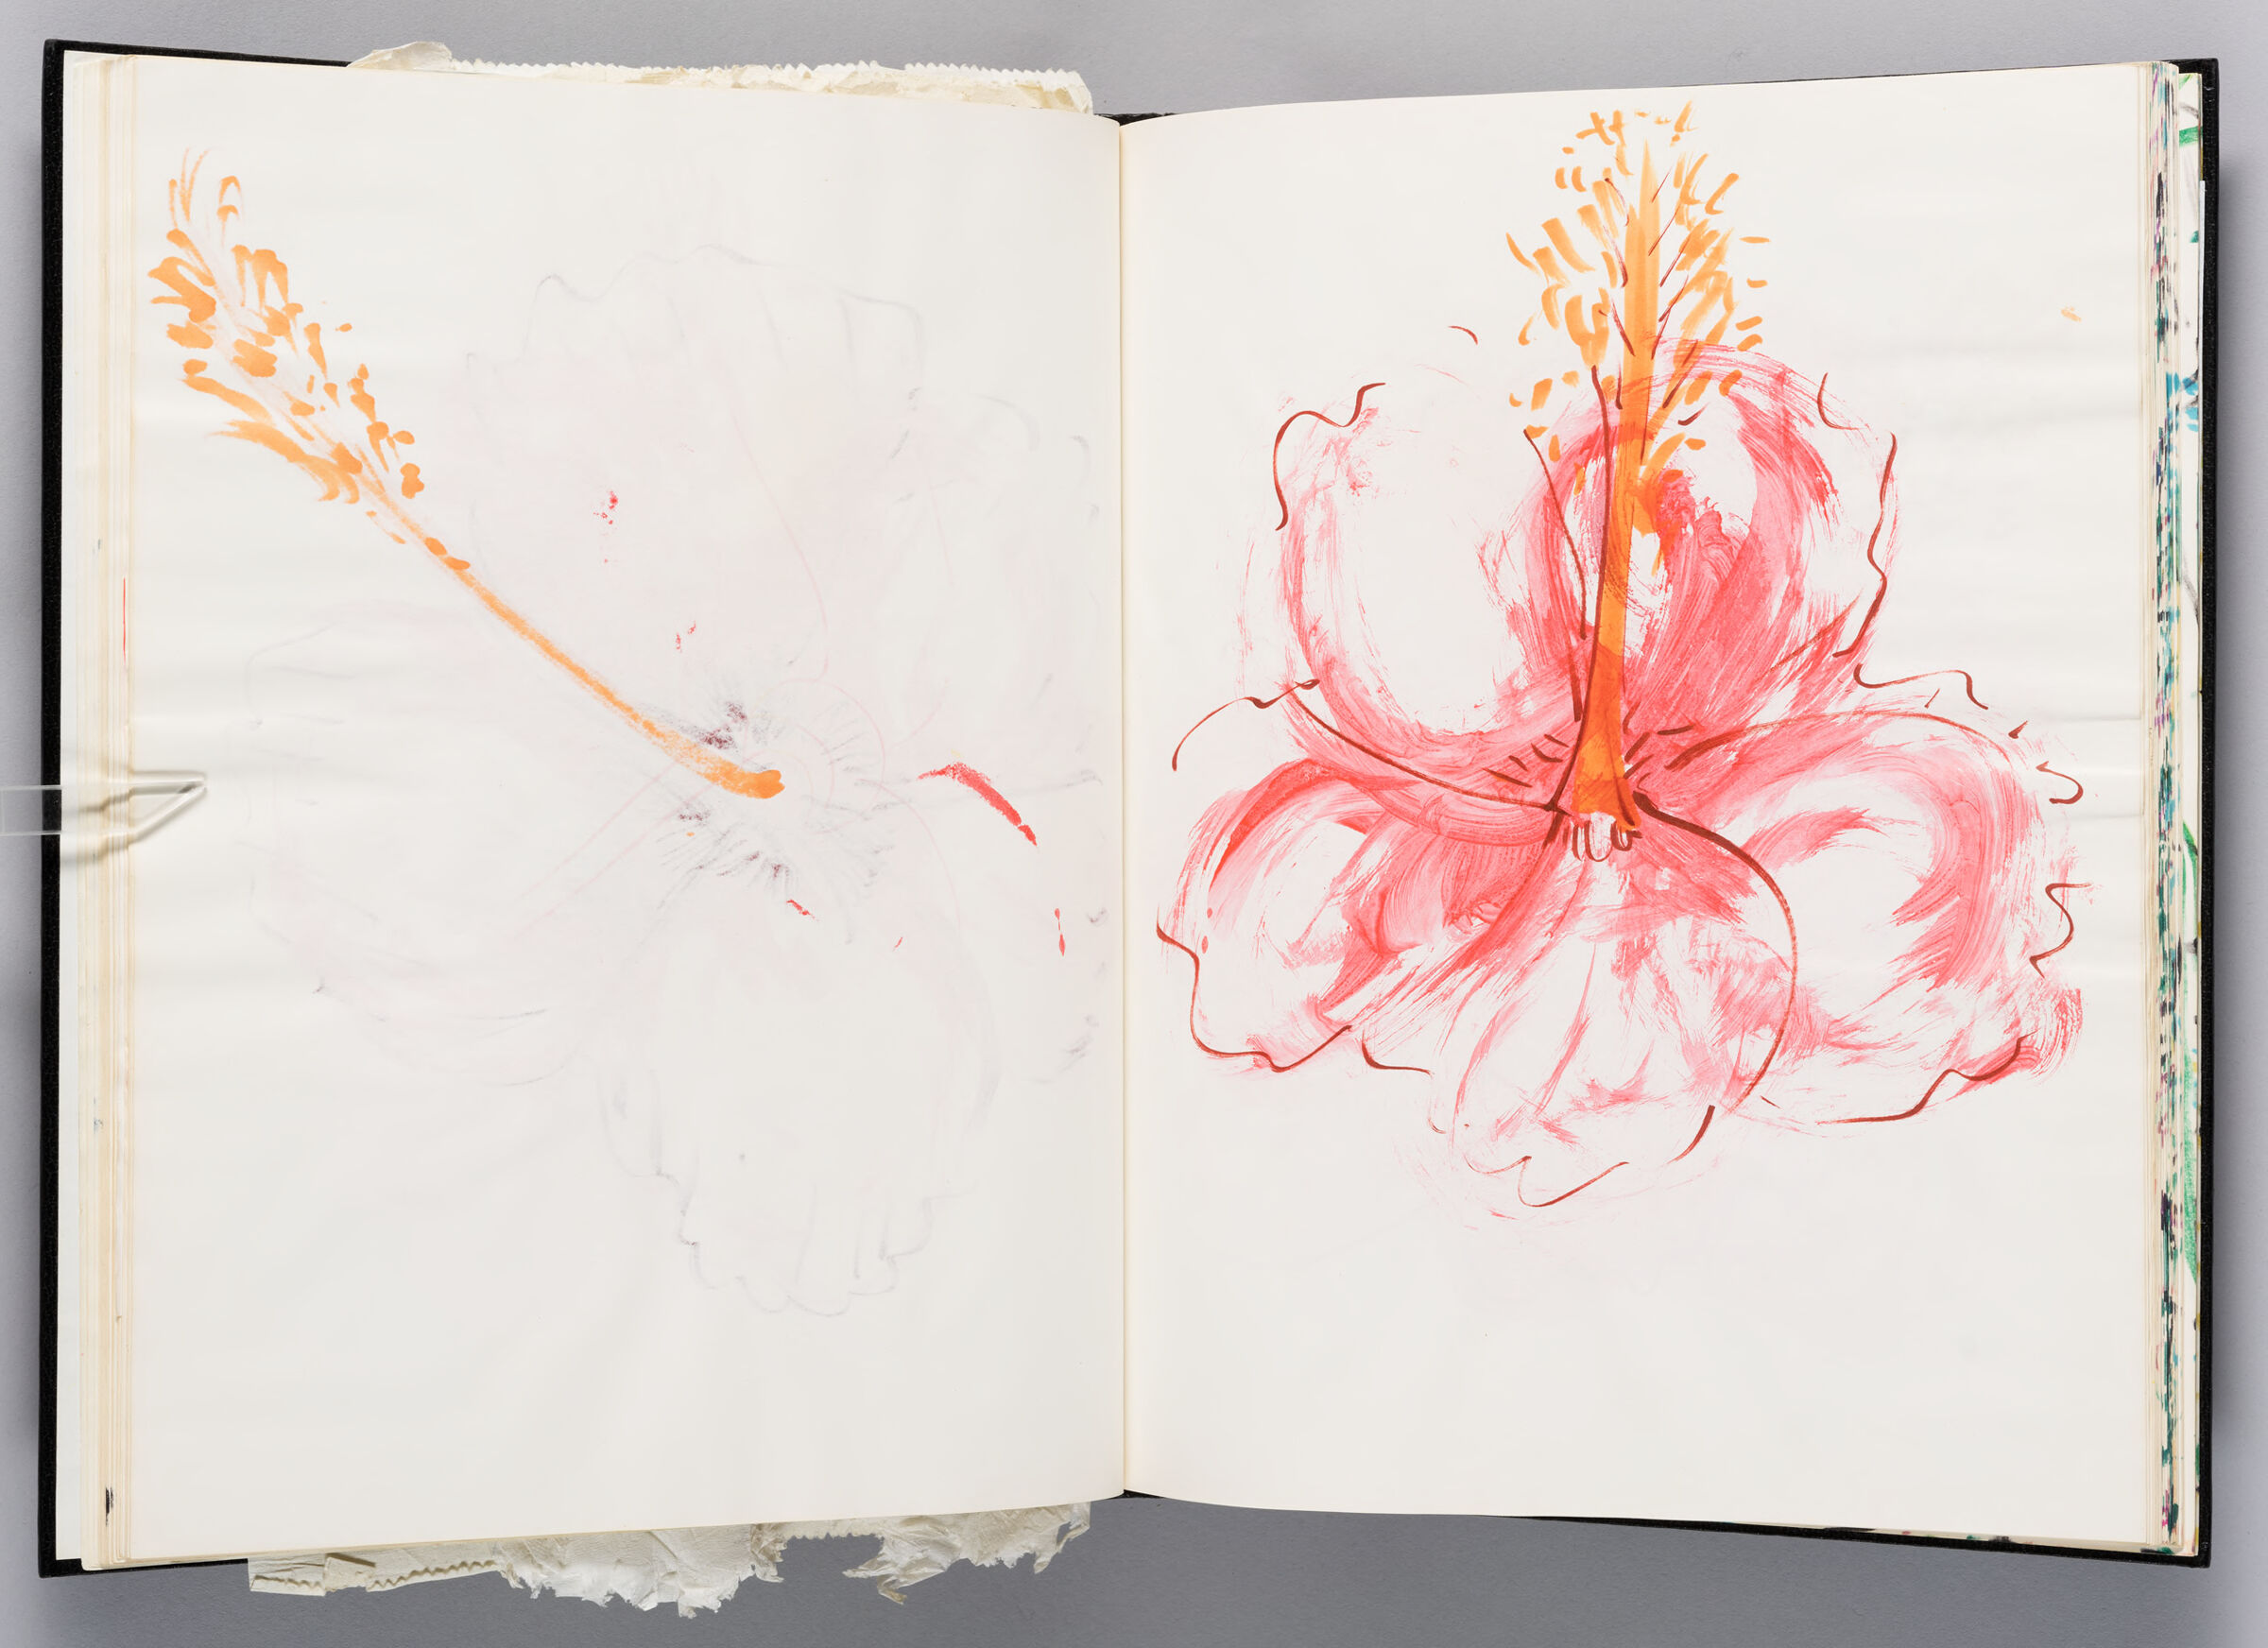 Untitled (Bleed-Through Of Previous Page And Color Transfer, Left Page); Untitled (Hibiscus Flower, Right Page)
